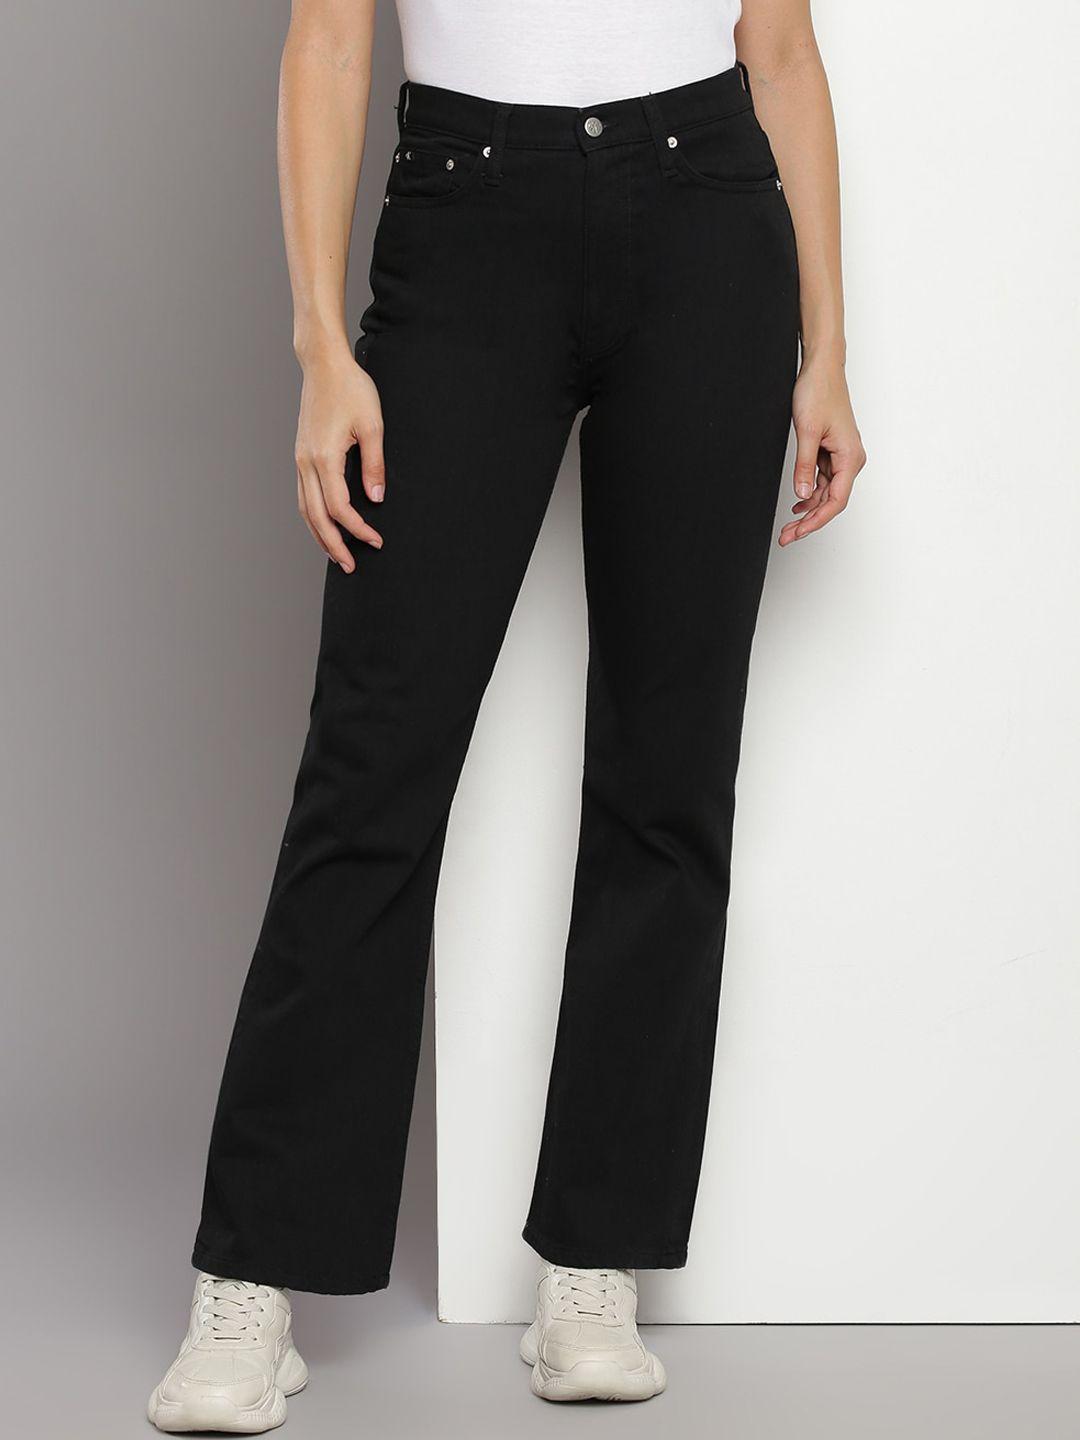 calvin klein women clean look stretchable jeans